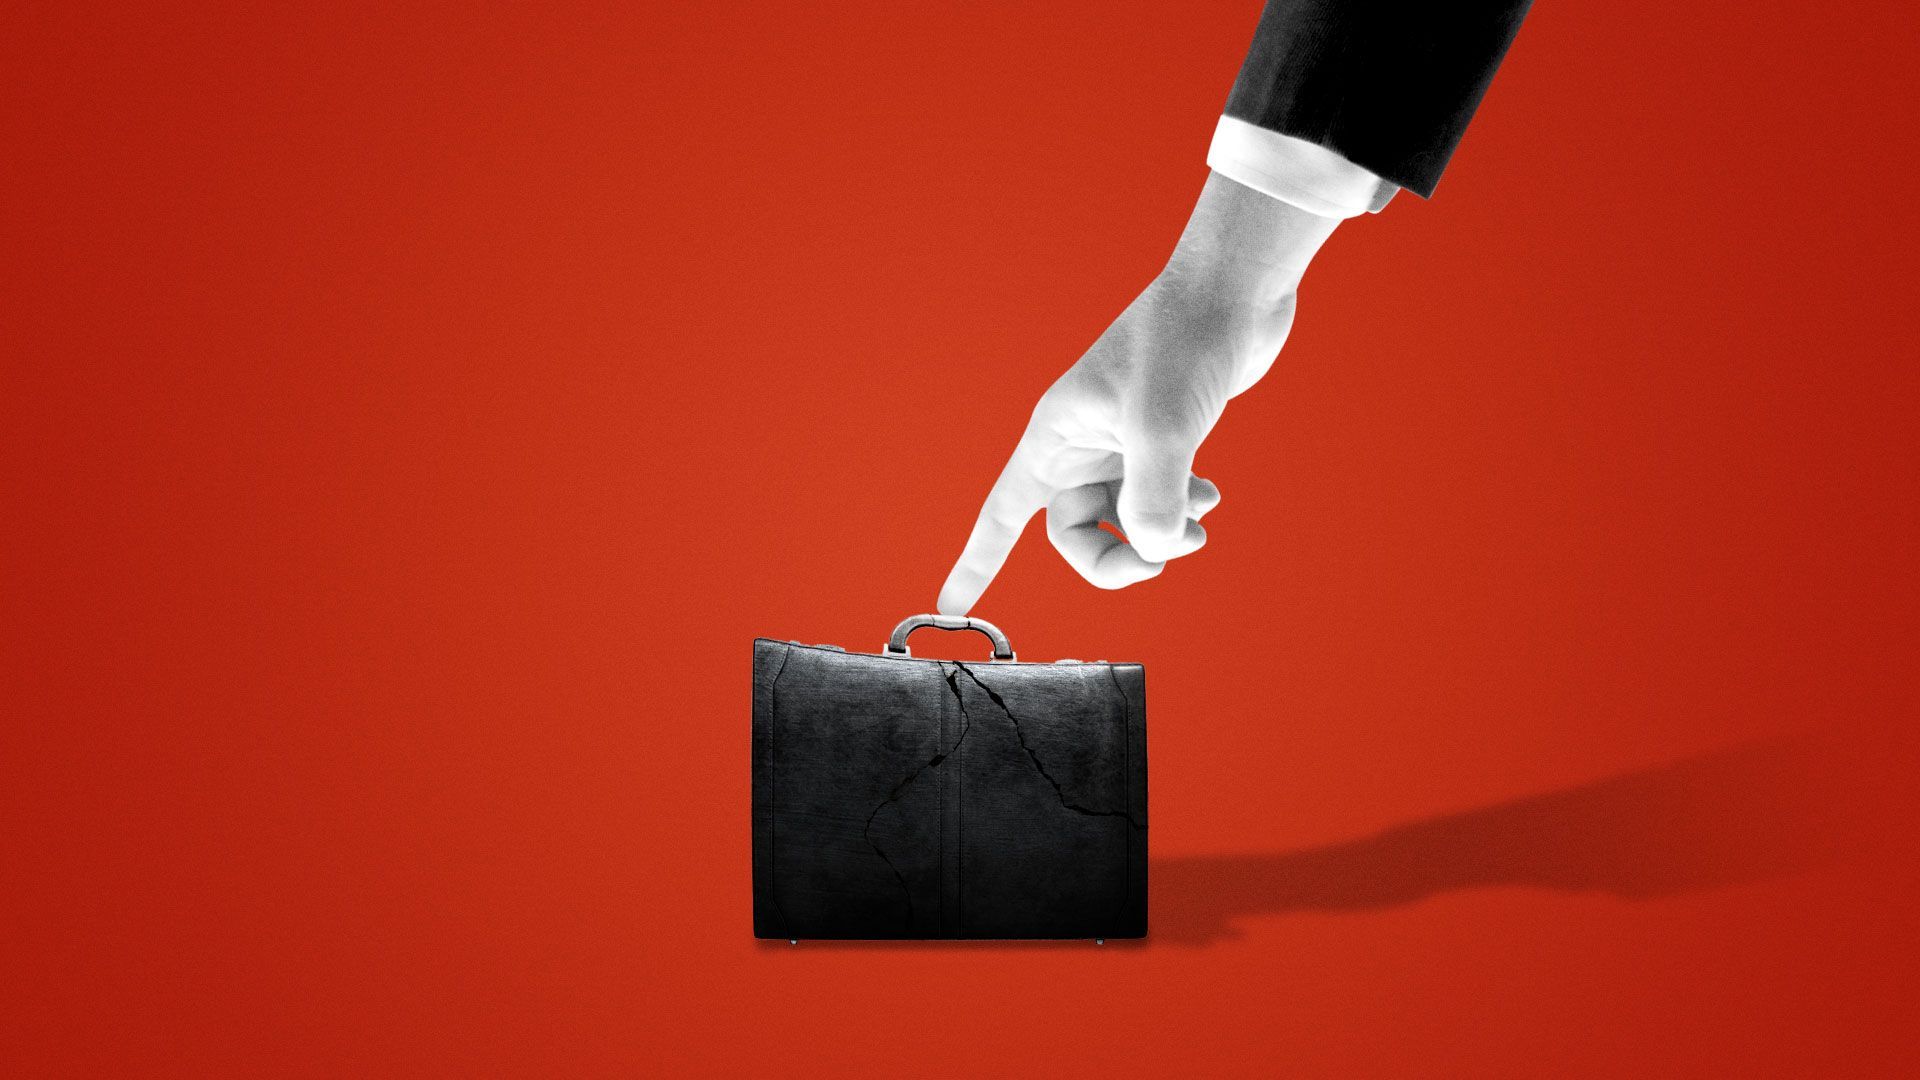 Illustration of a suited hand with its finger pushing down on a cracked briefcase